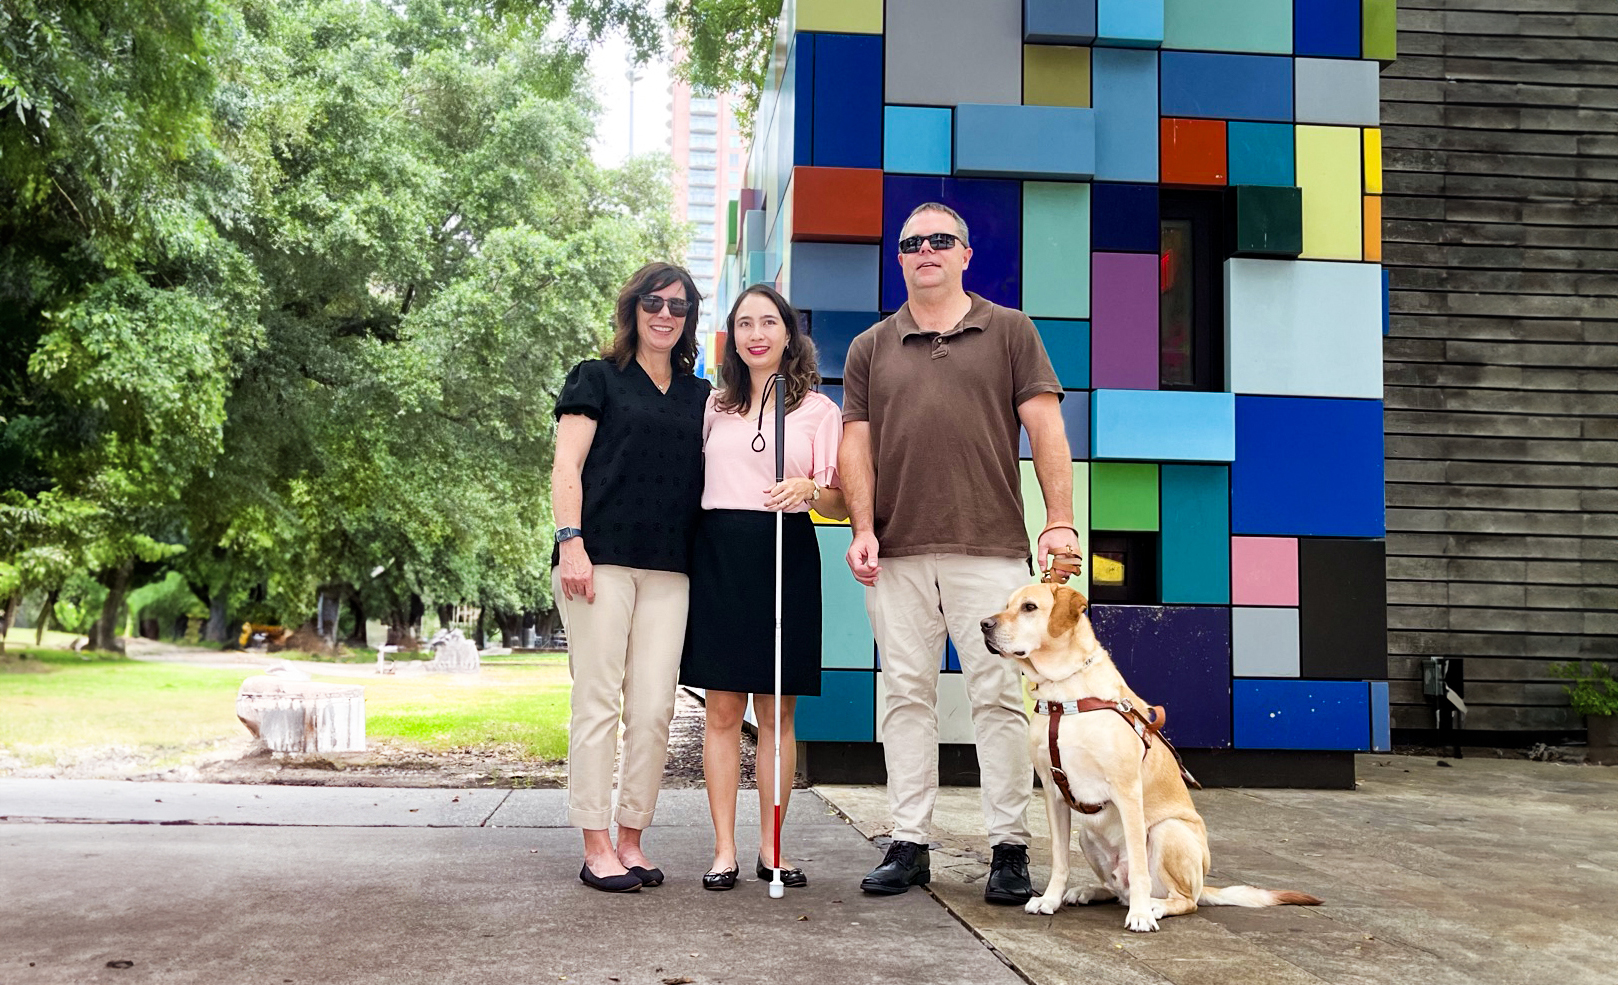 Three people standing outside in front of a piece of colorful art; the person on the far left is wearing sunglasses, the middle person is holding a cane, and the person on the right is also wearing sunglasses and is holding the leash of his dog guide.